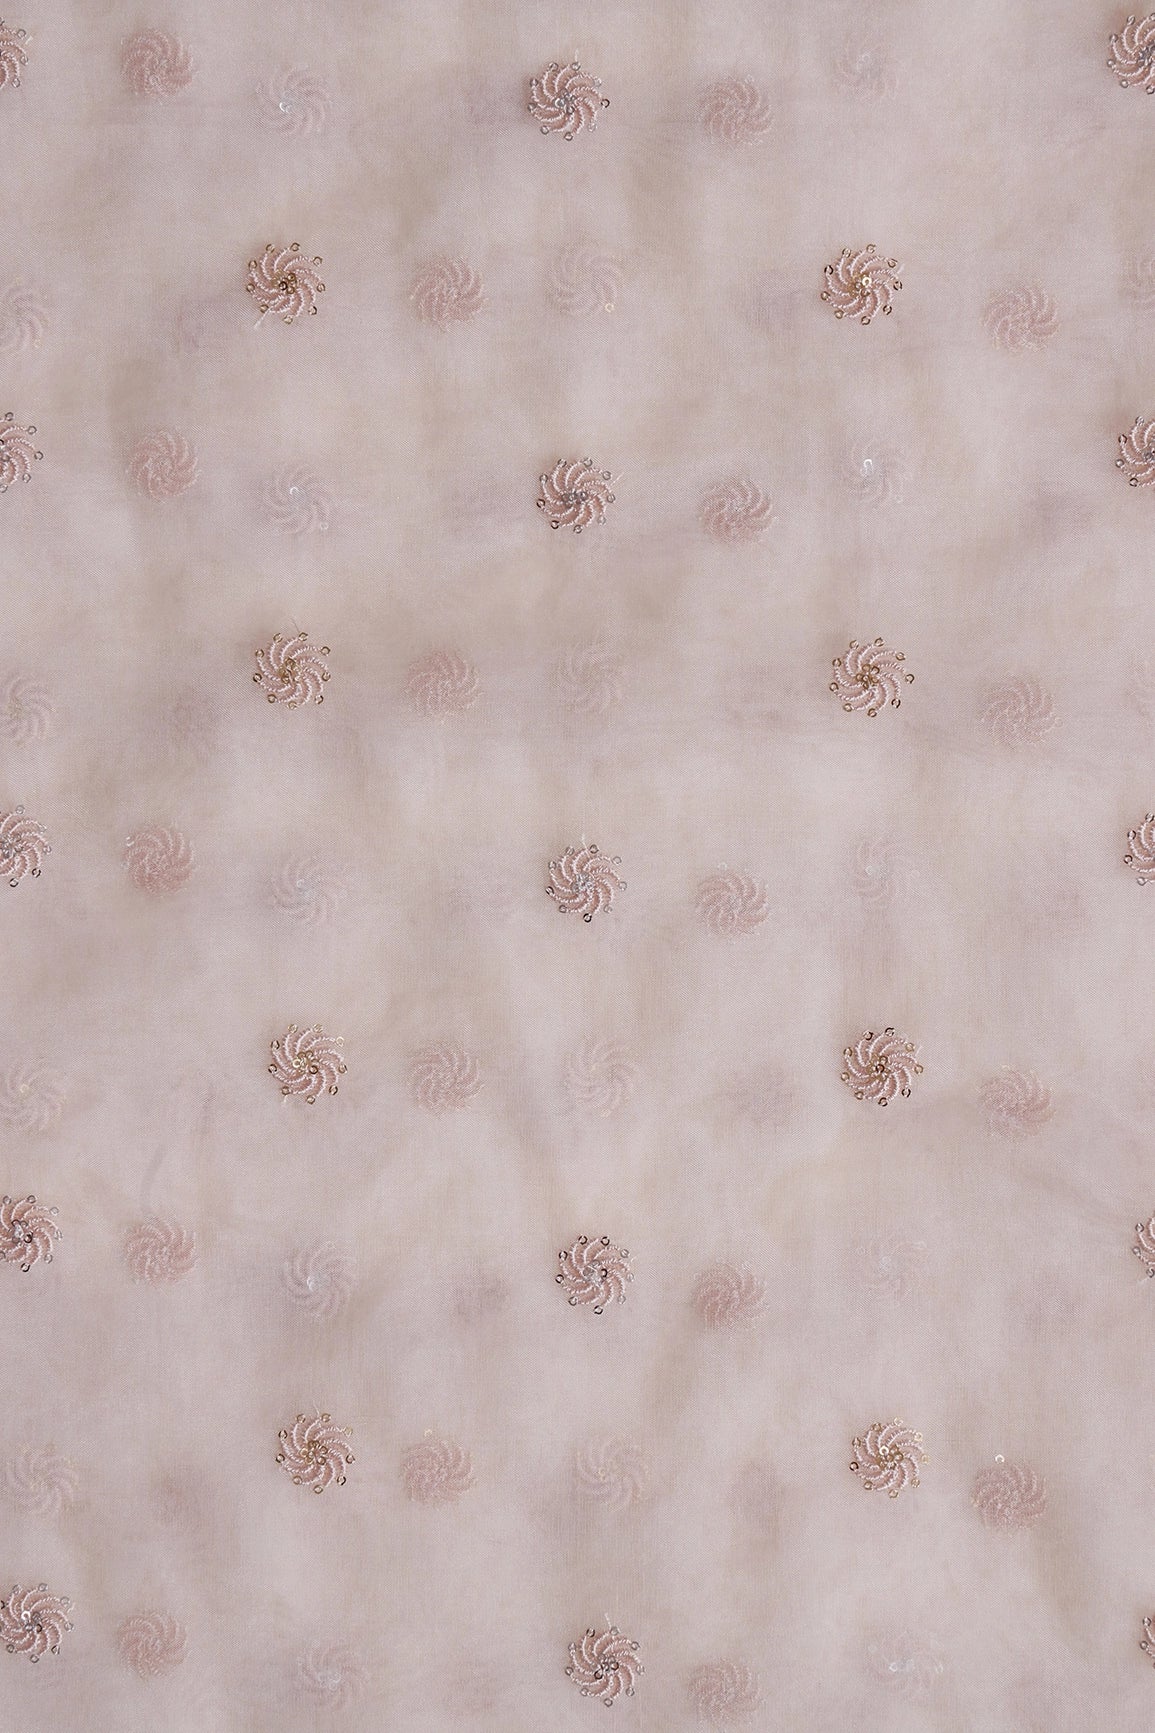 Gold And Silver Sequins Beautiful Small Motif Embroidery Work On Pastel Peach Organza Fabric